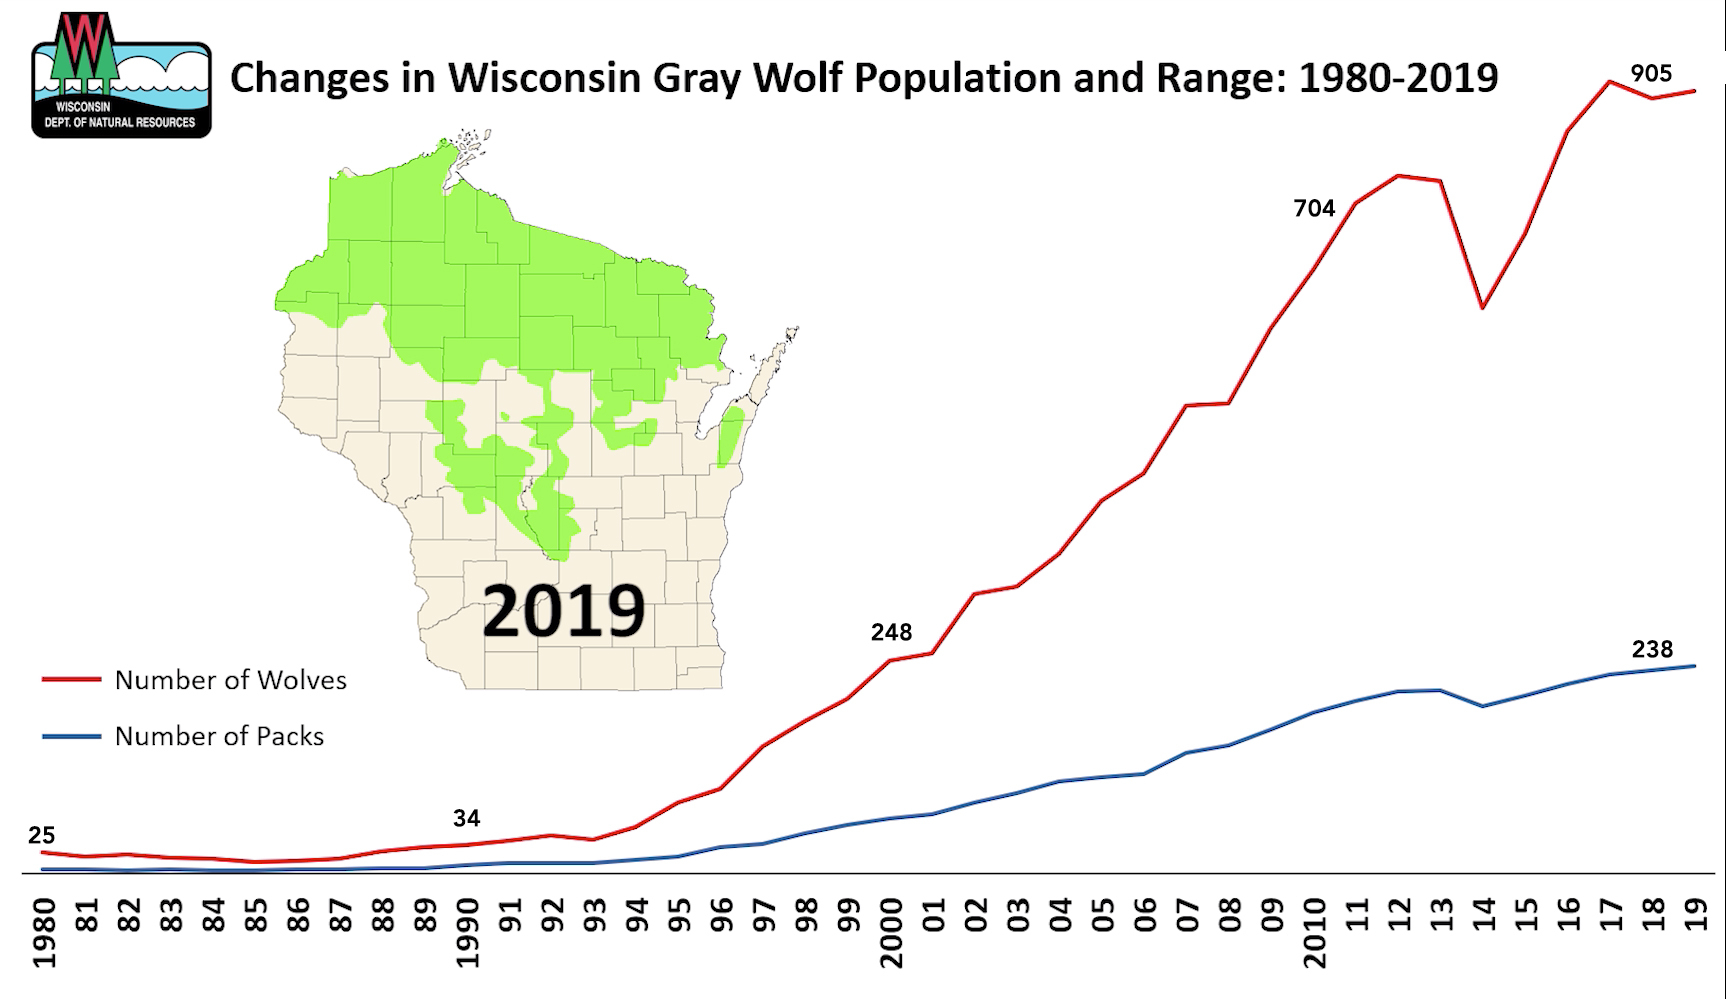 chart showing changes in Wisconsin’s gray wolf population and distribution over the past 40 years